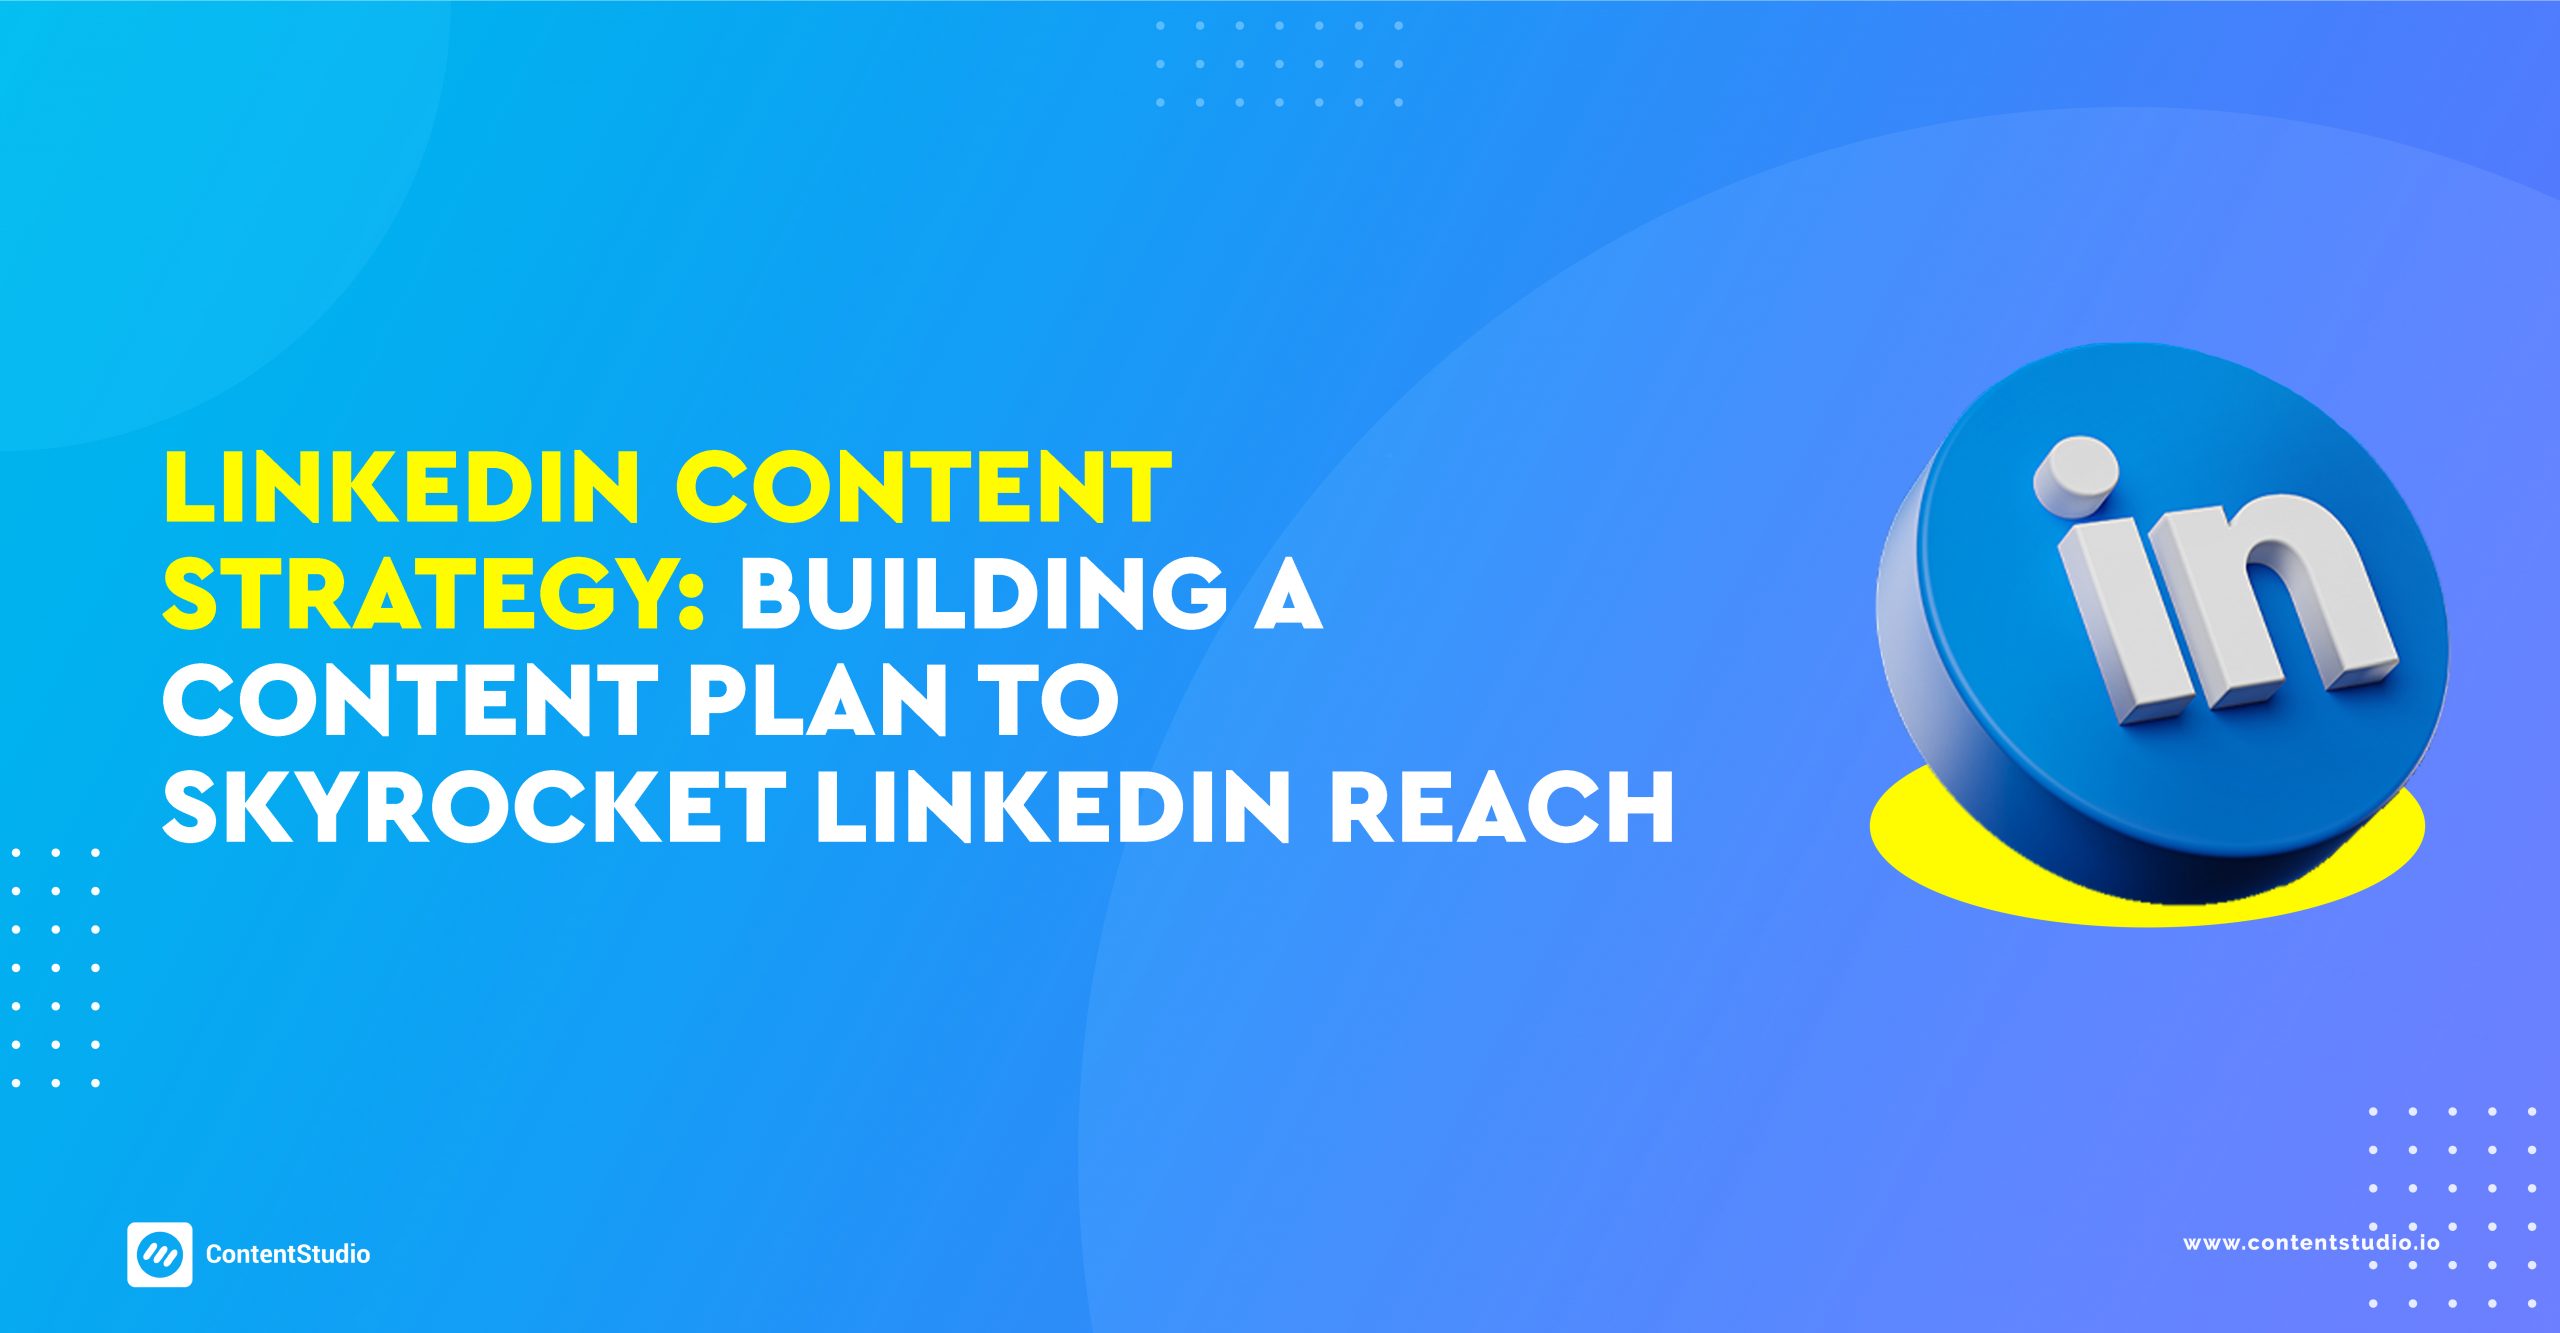 LinkedIn Content Strategy: Building a Content Plan to Skyrocket LinkedIn Reach